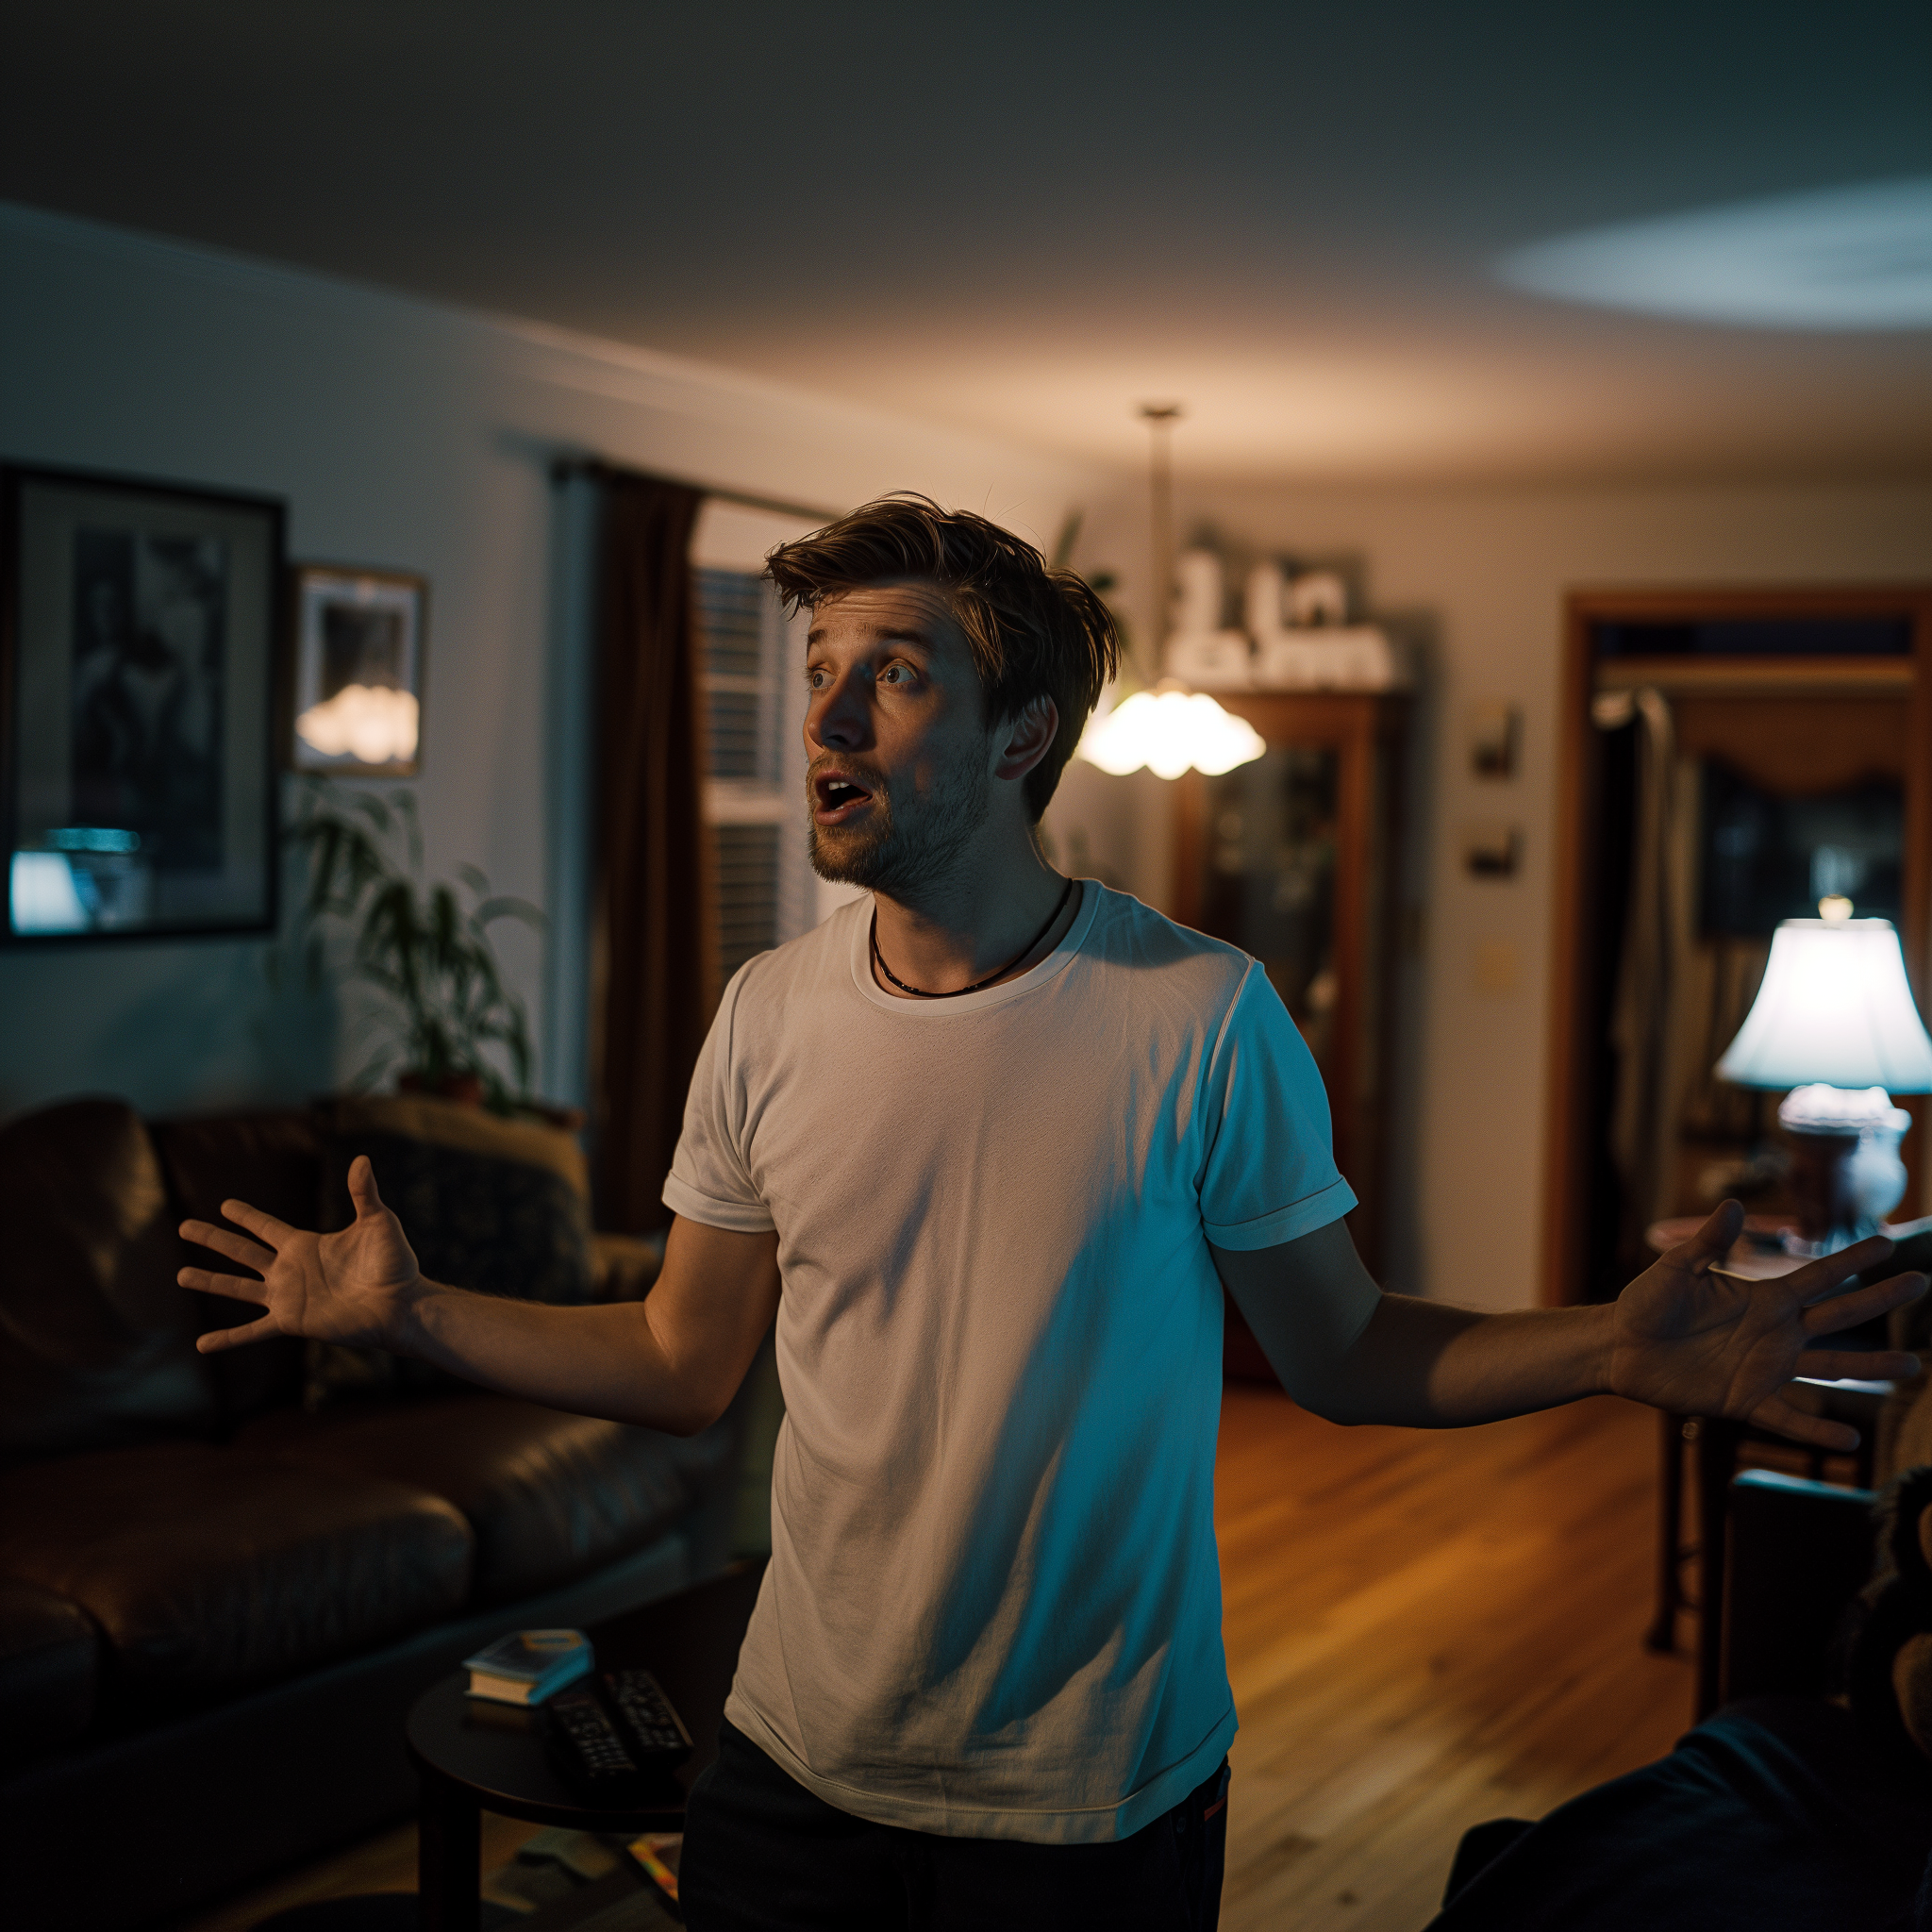 A shocked man is standing in a living room | Source: Midjourney